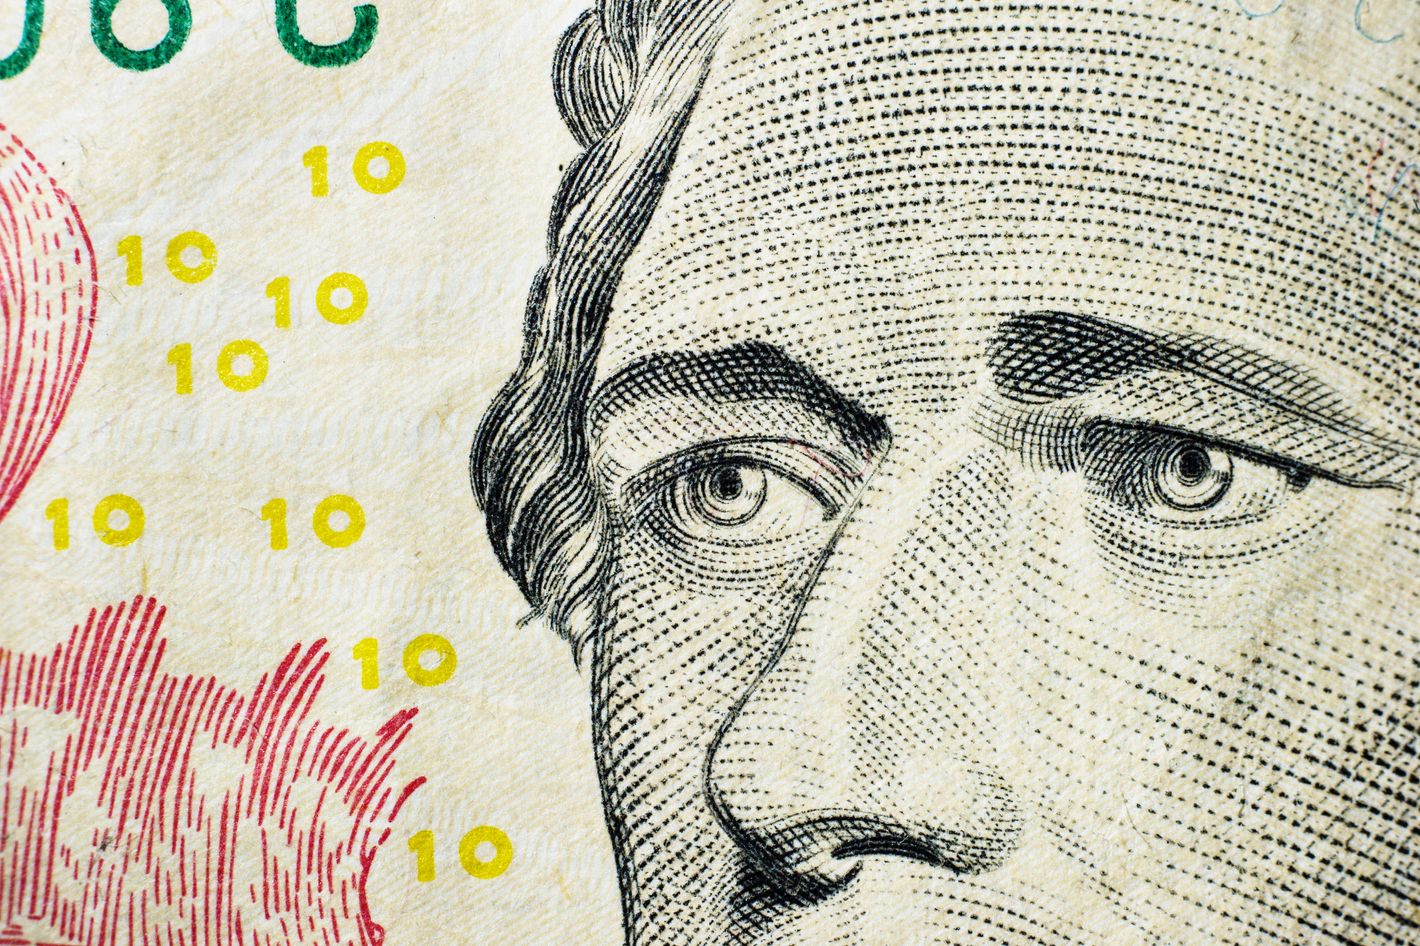 Why the Treasury Decided to Put a Woman on the $10 Bill Instead of